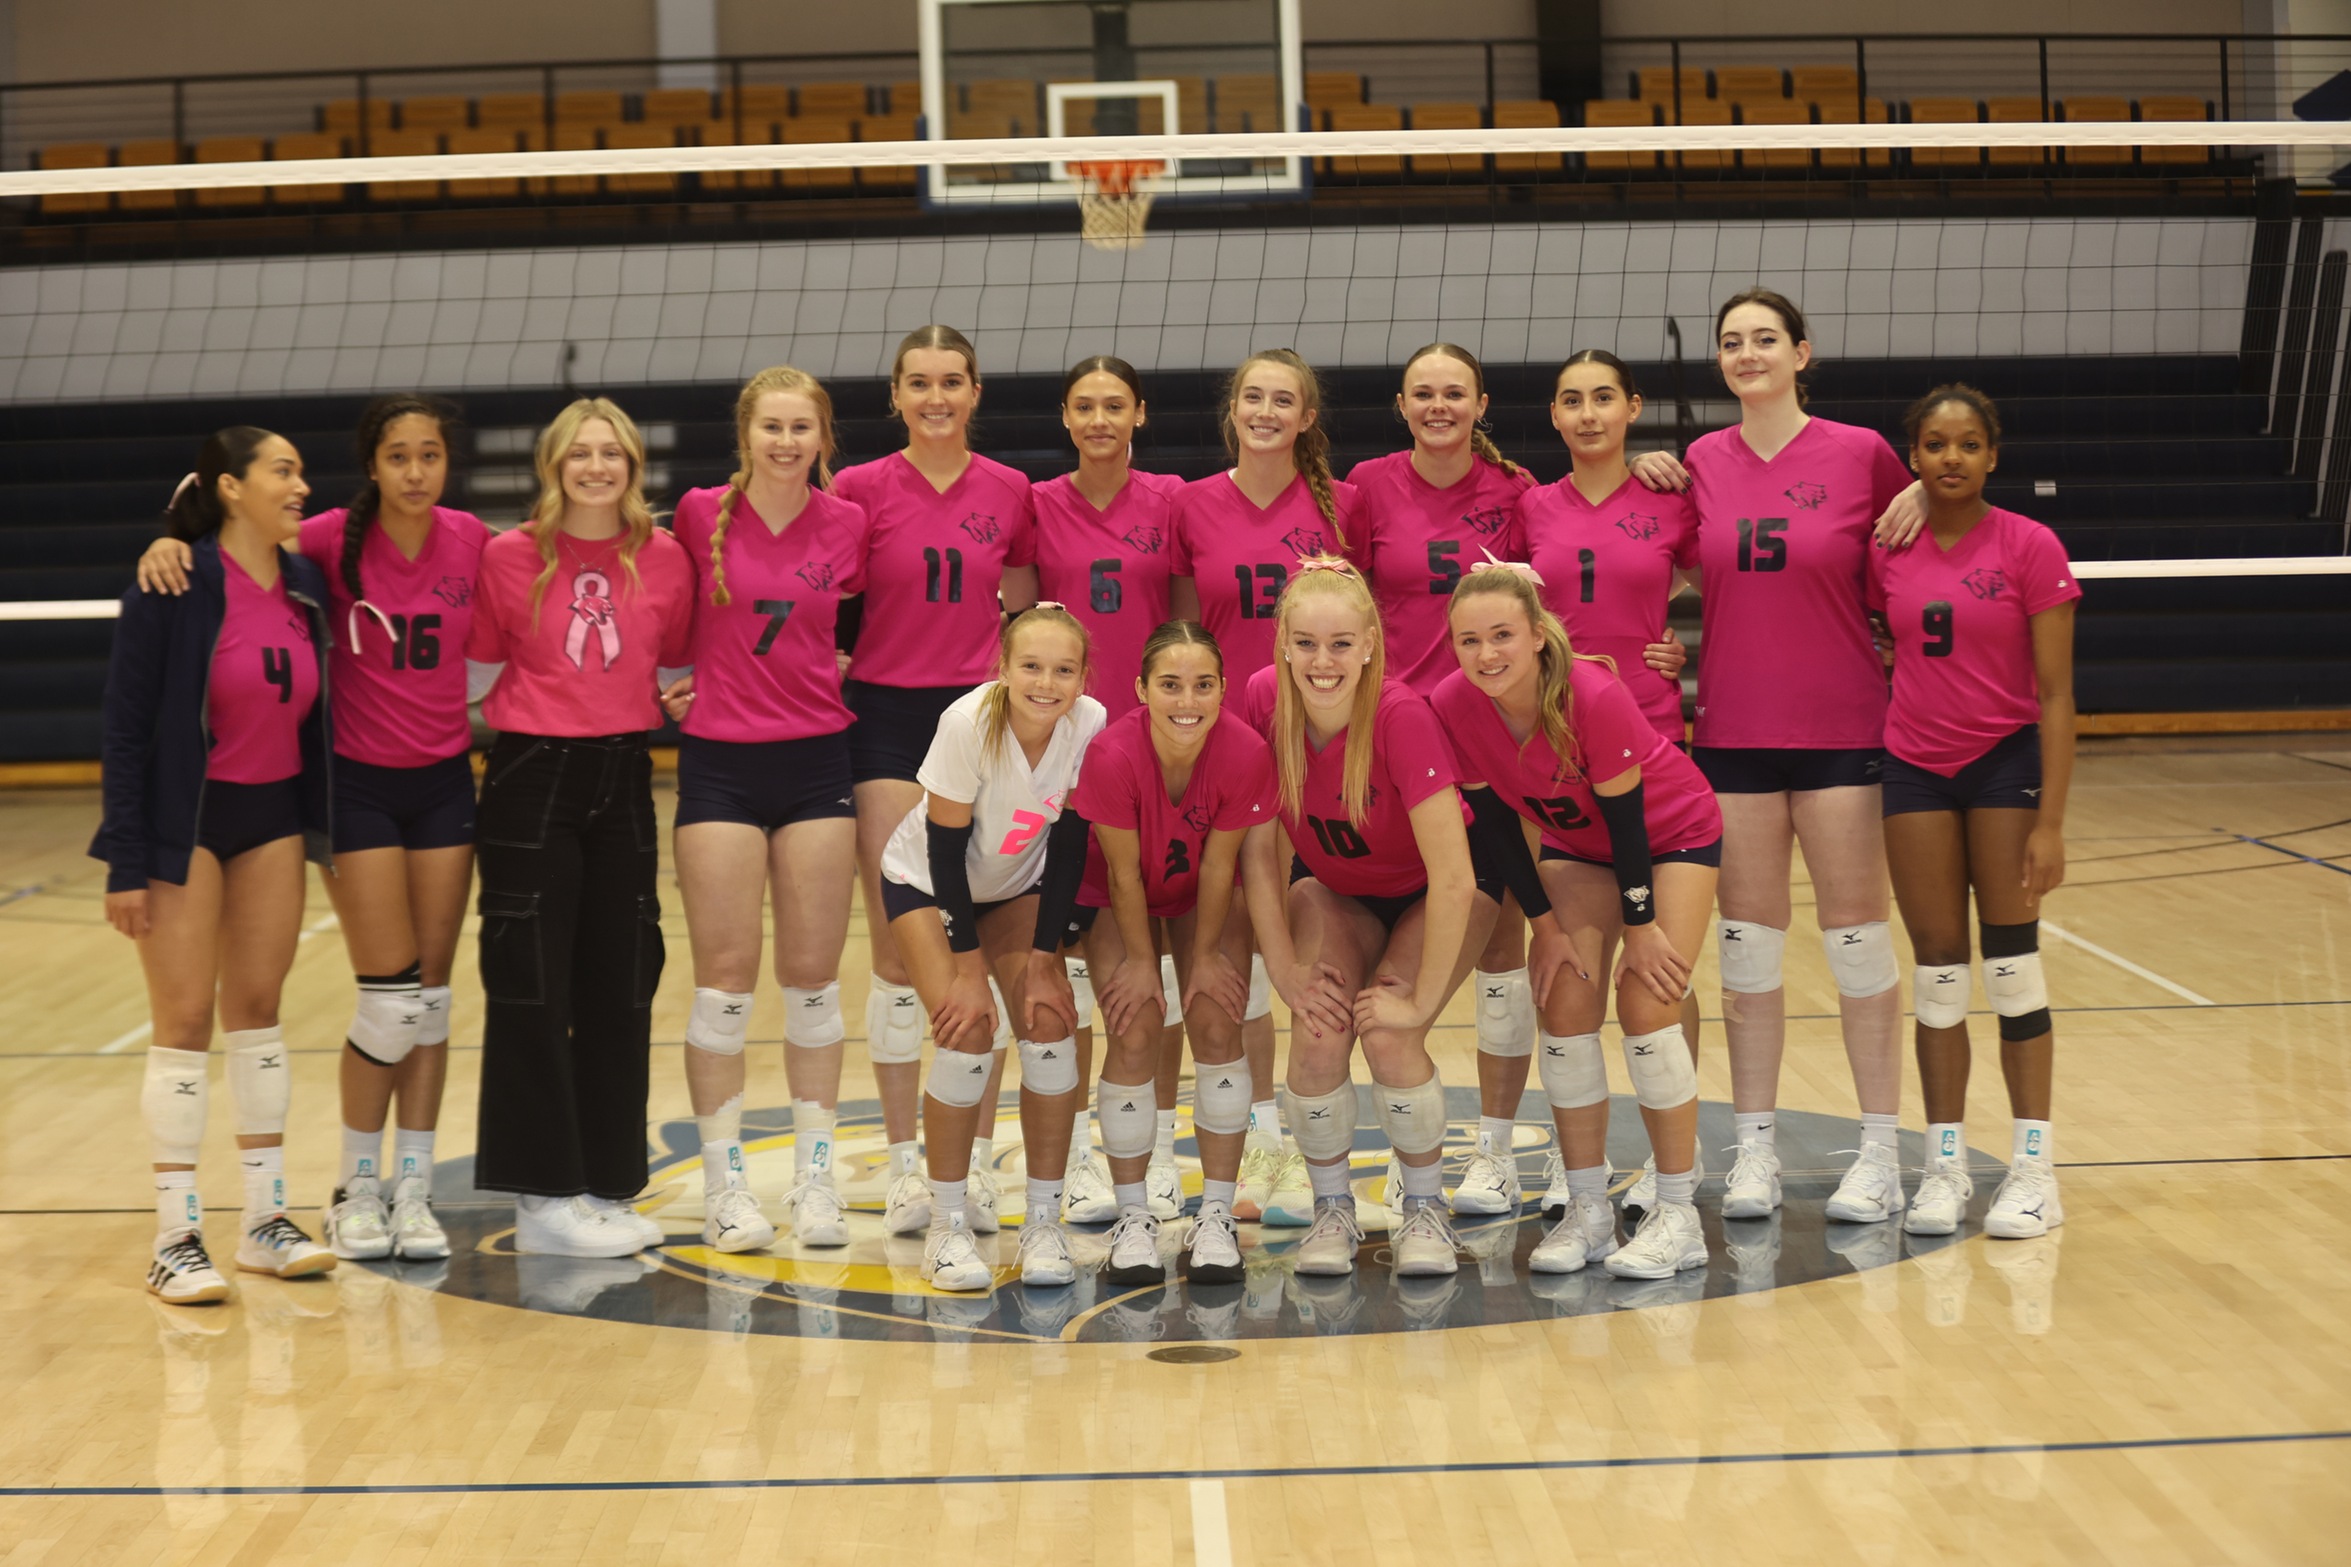 The Cougars in their pink uniforms.